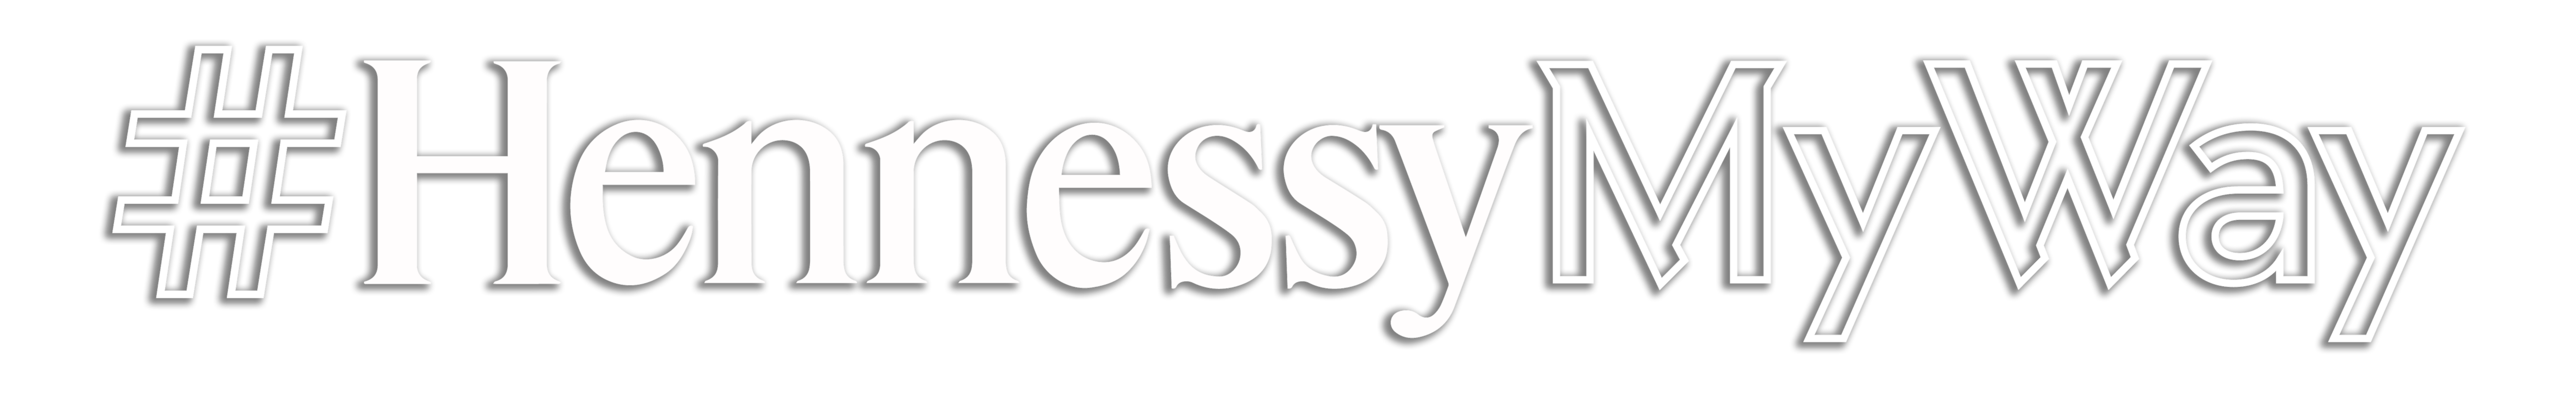 HENNESSYMYWAY_LOGO_WHITE_shadow.png